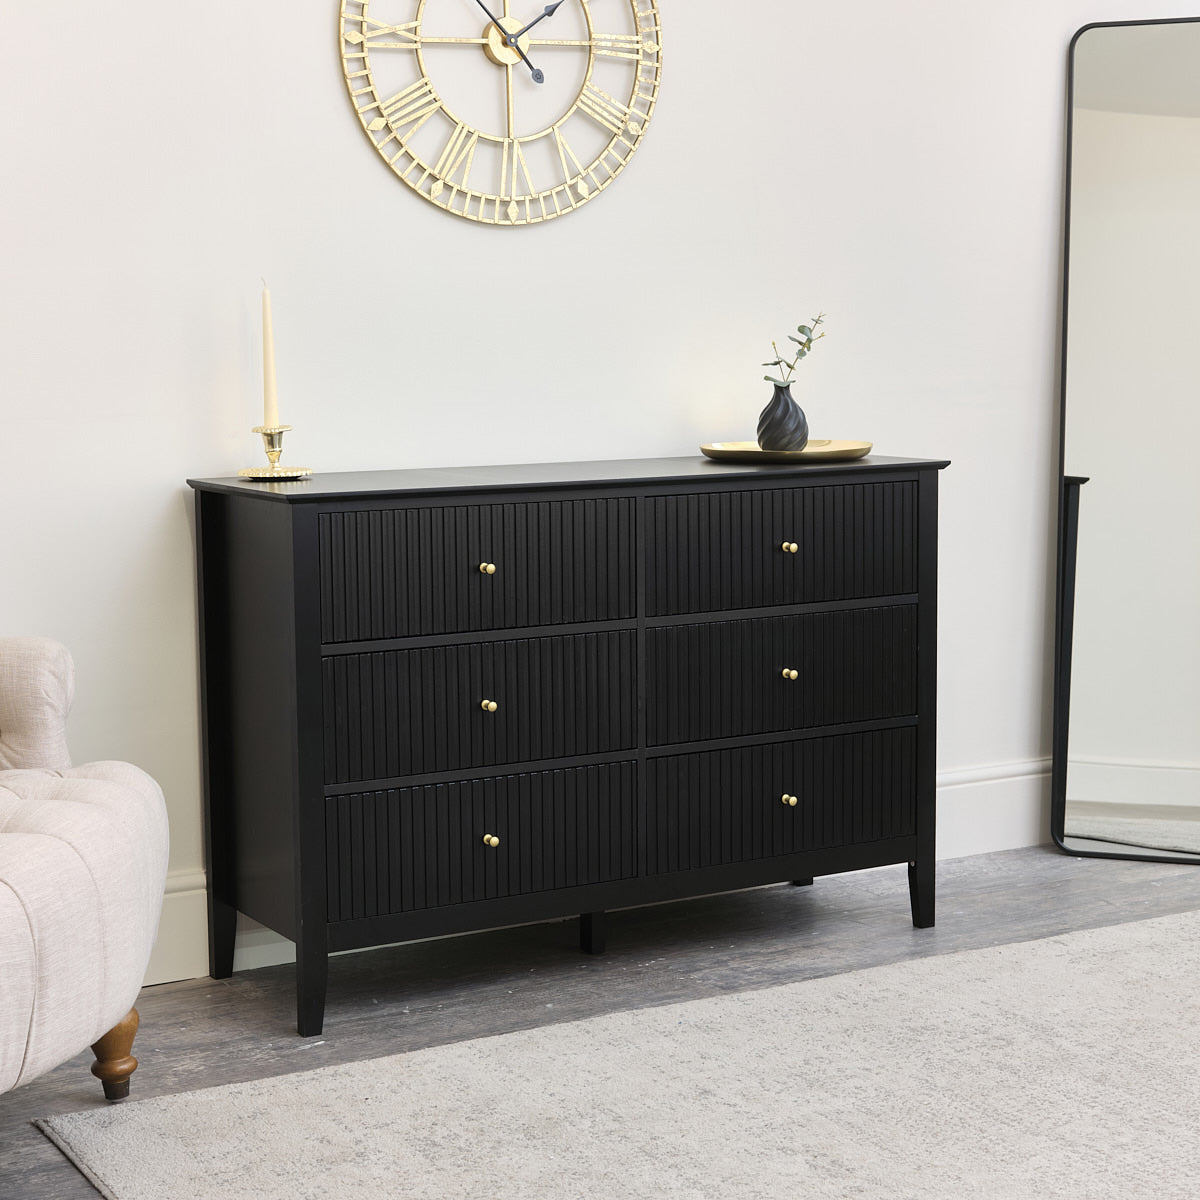 Large Chest of Drawers and Pair of Bedside Tables - Hales Black Range